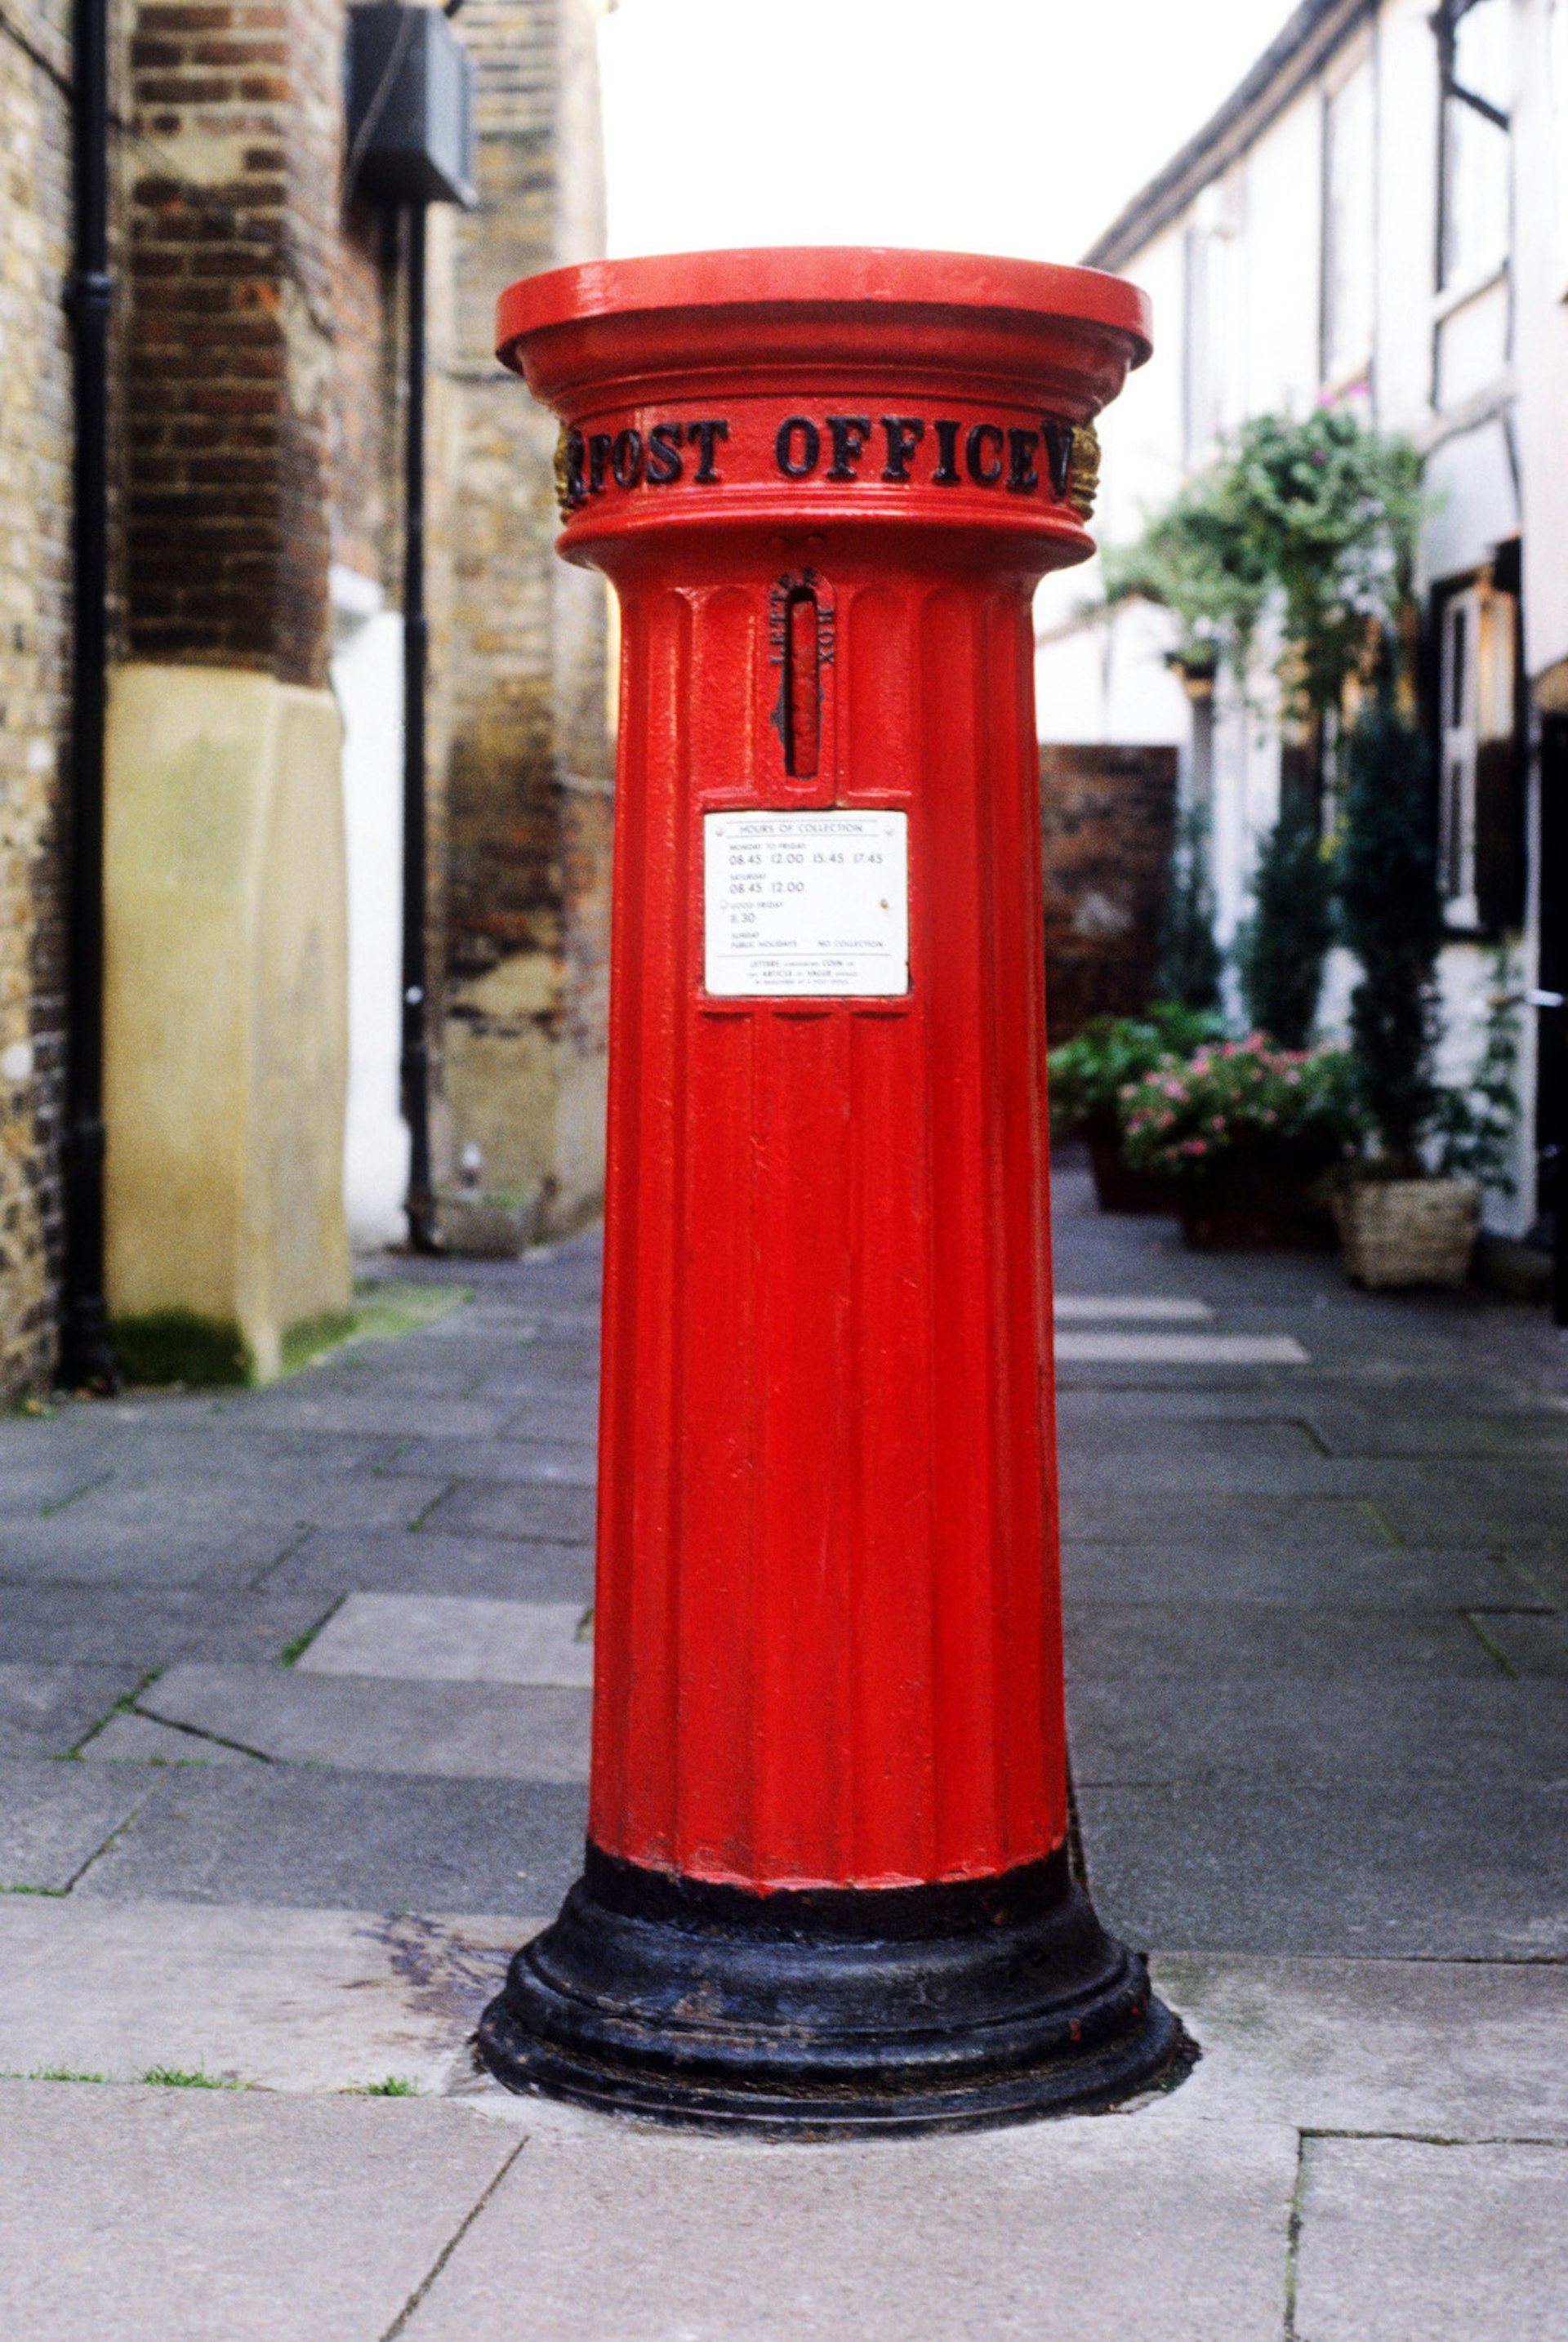 An old postbox in Eton © Neil Holmes / Getty Images